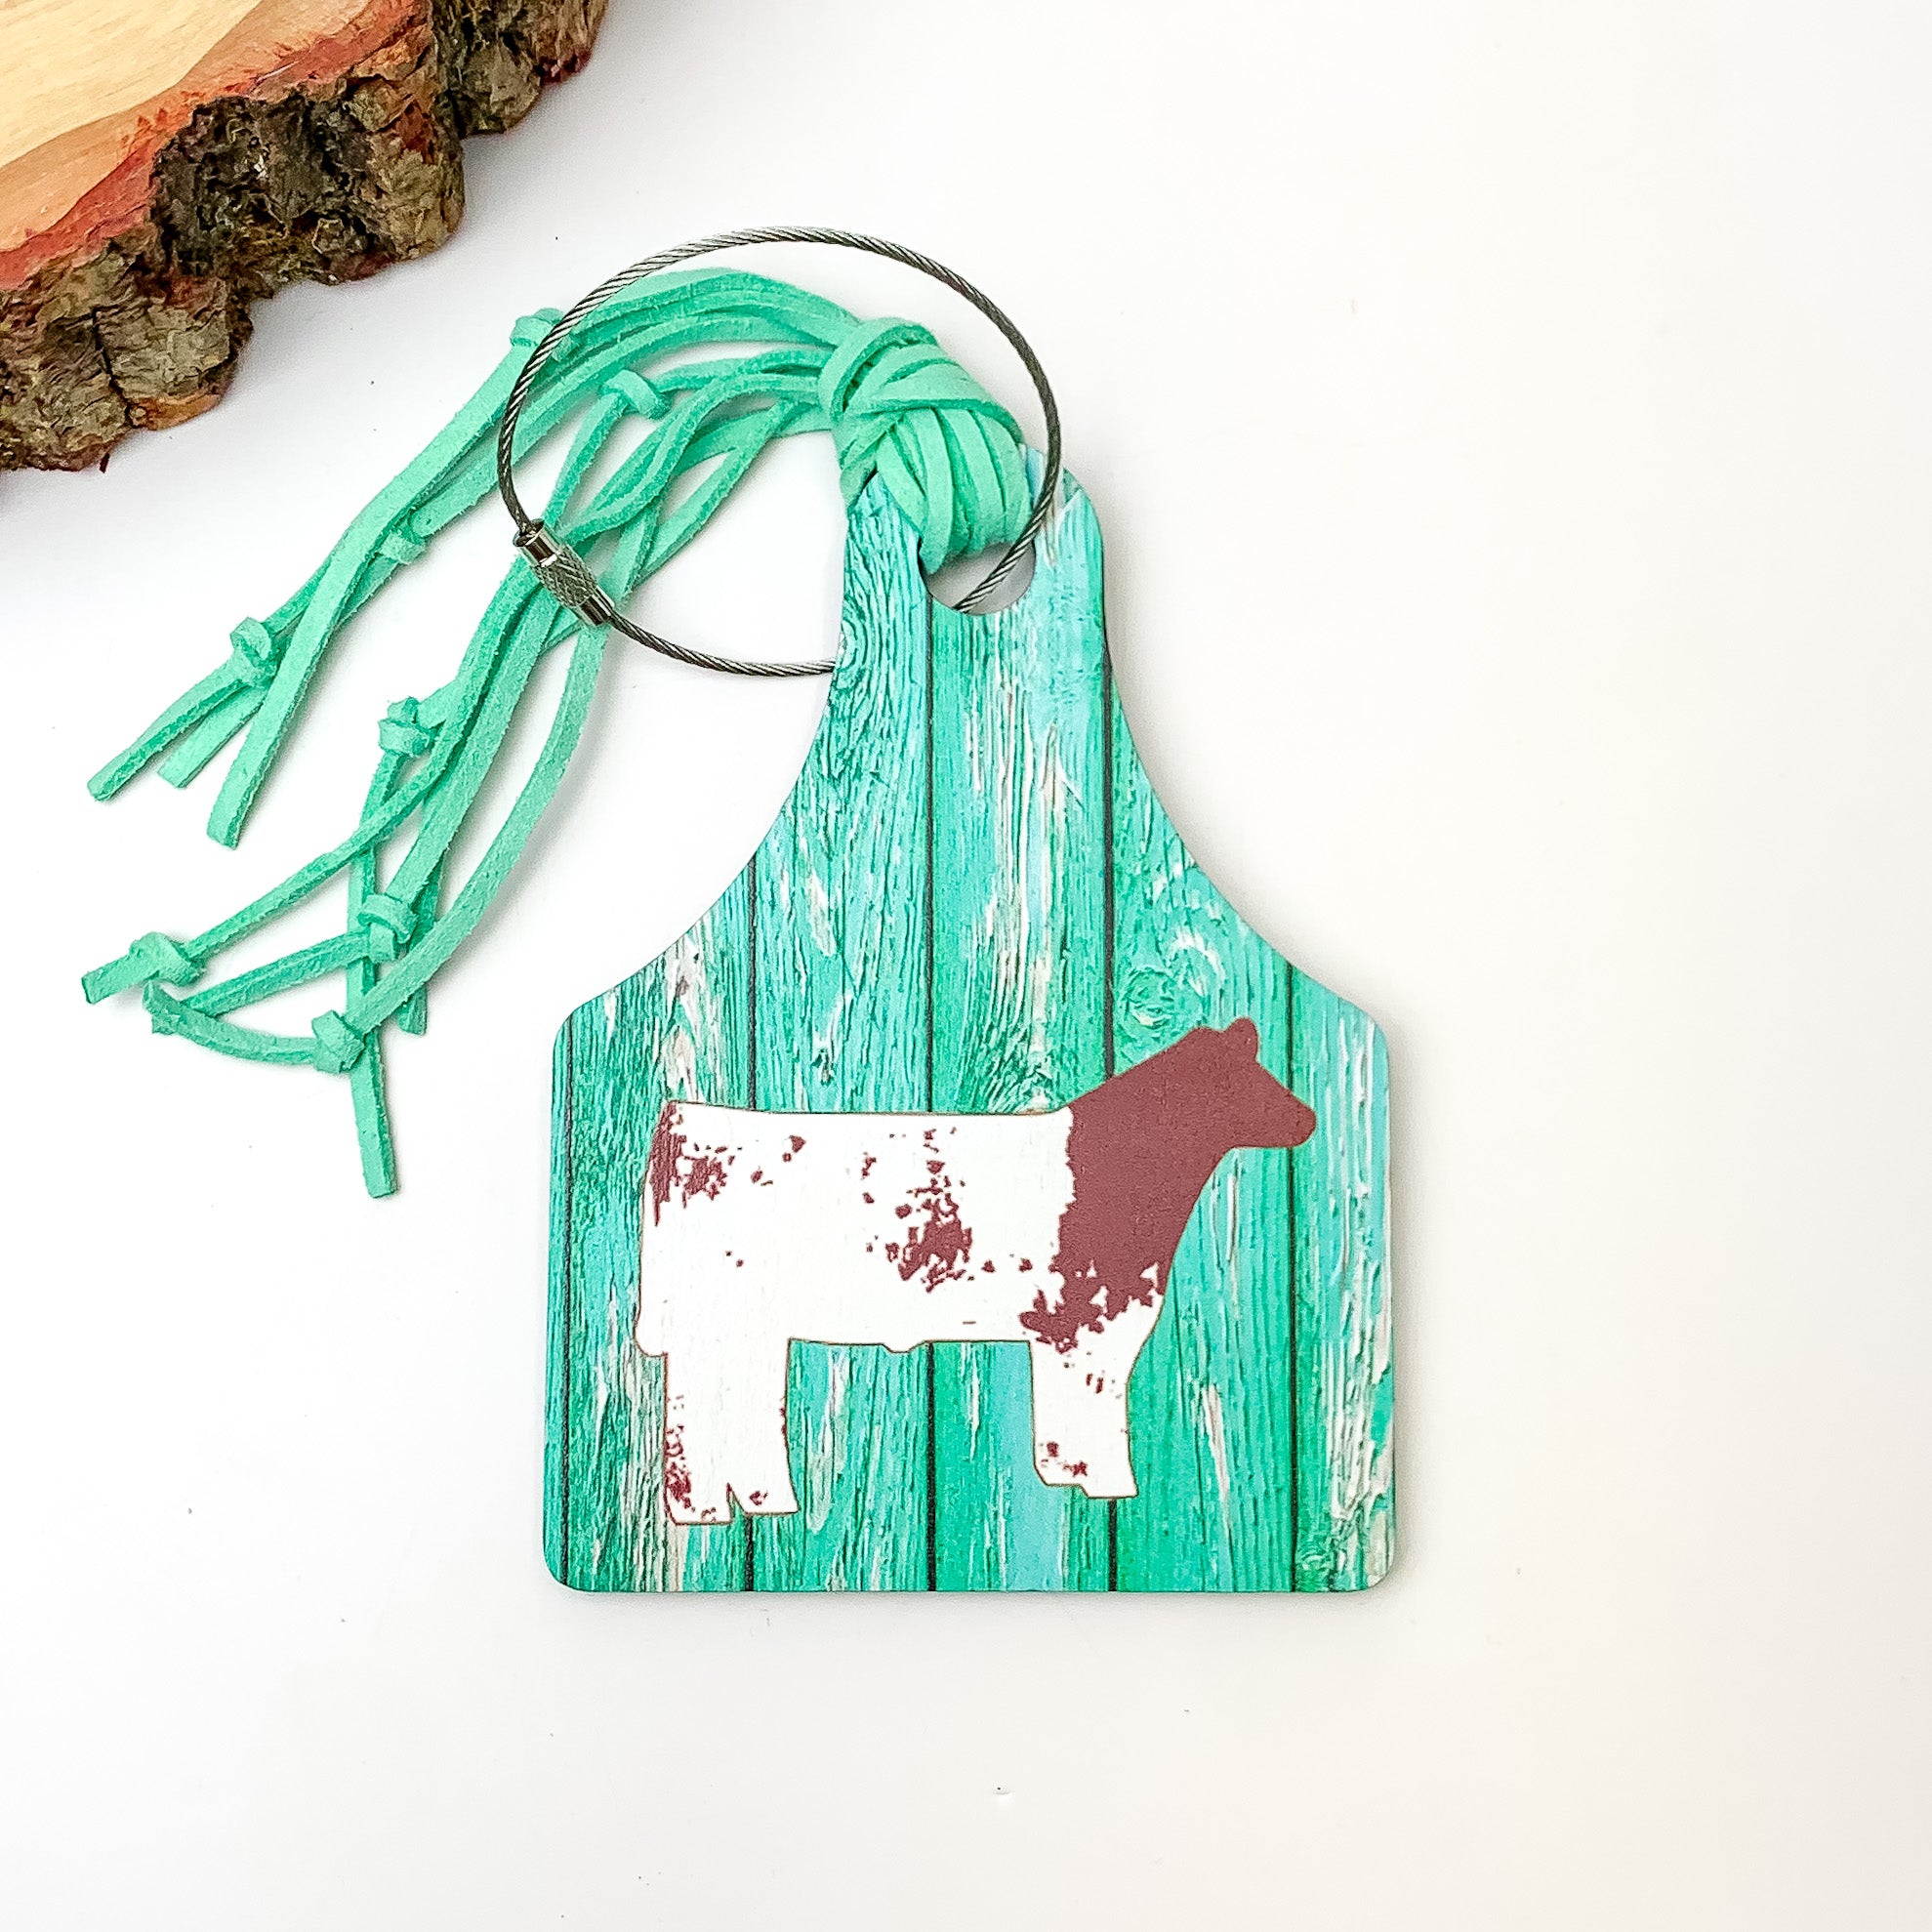 Turquoise Luggage Tag With Cow. Pictured on a white background with a wood piece in the top left corner.